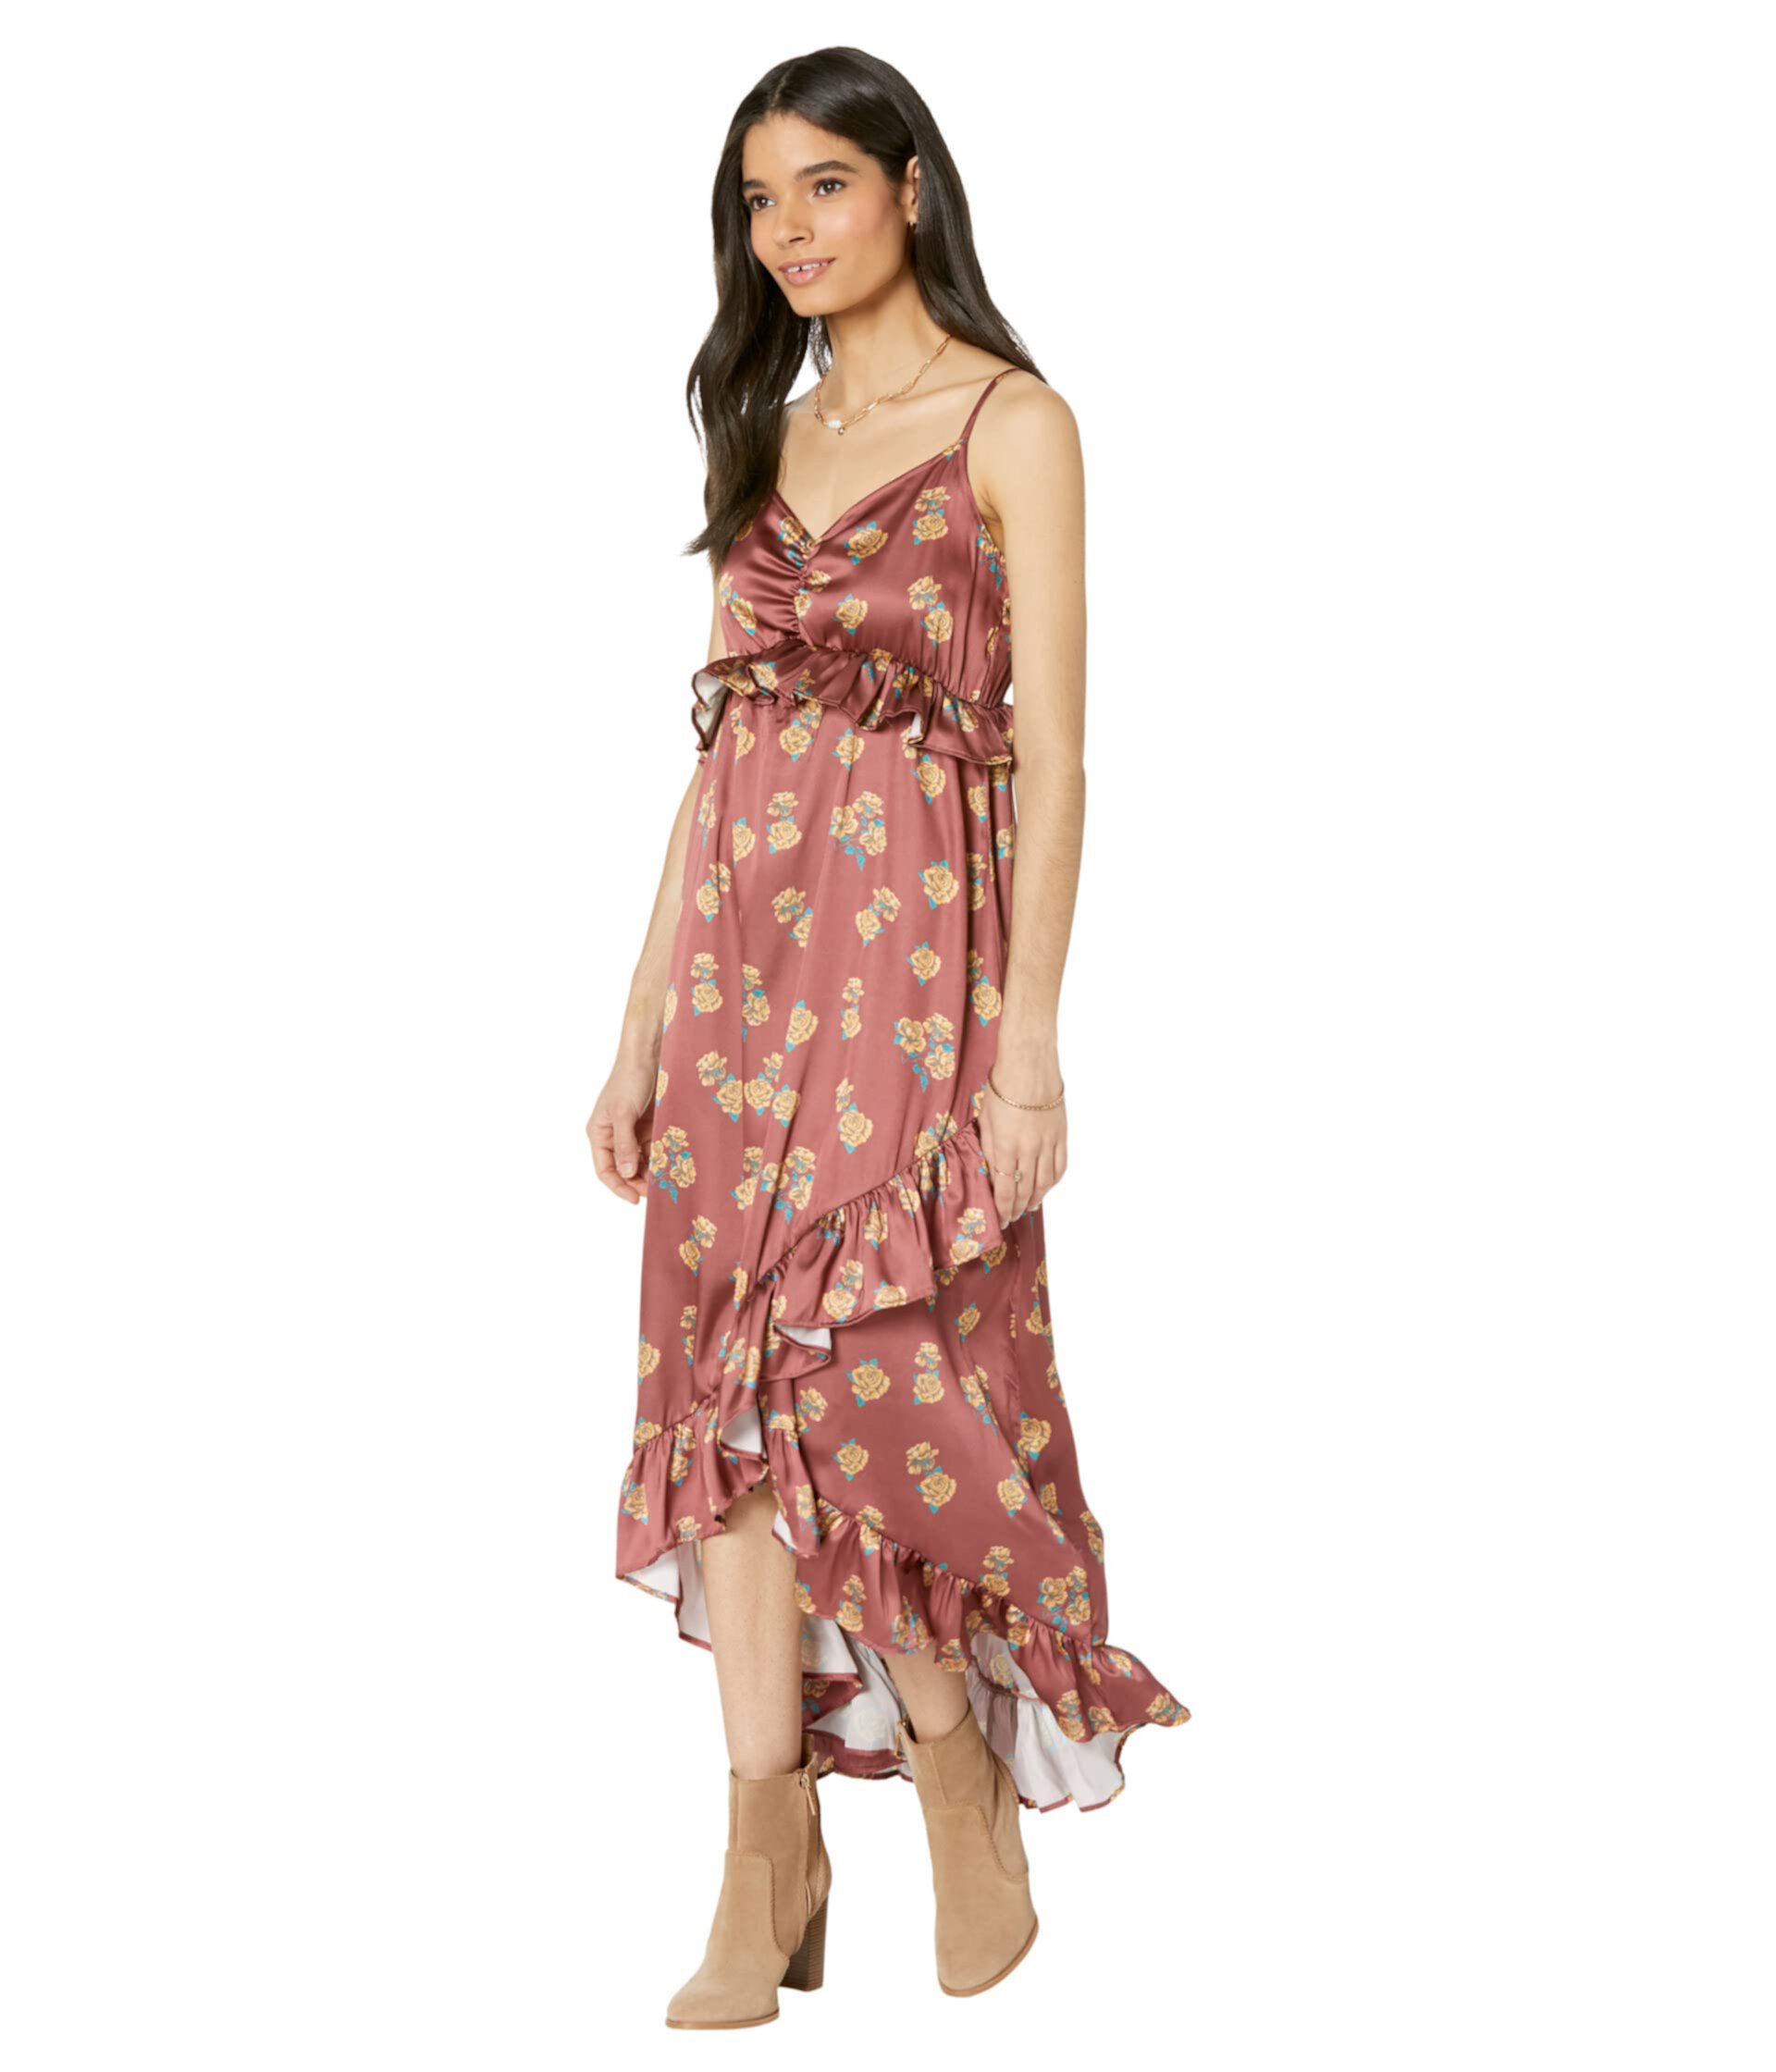 Satin Floral Flounce Strap Dress D5-3026 Rock and Roll Cowgirl